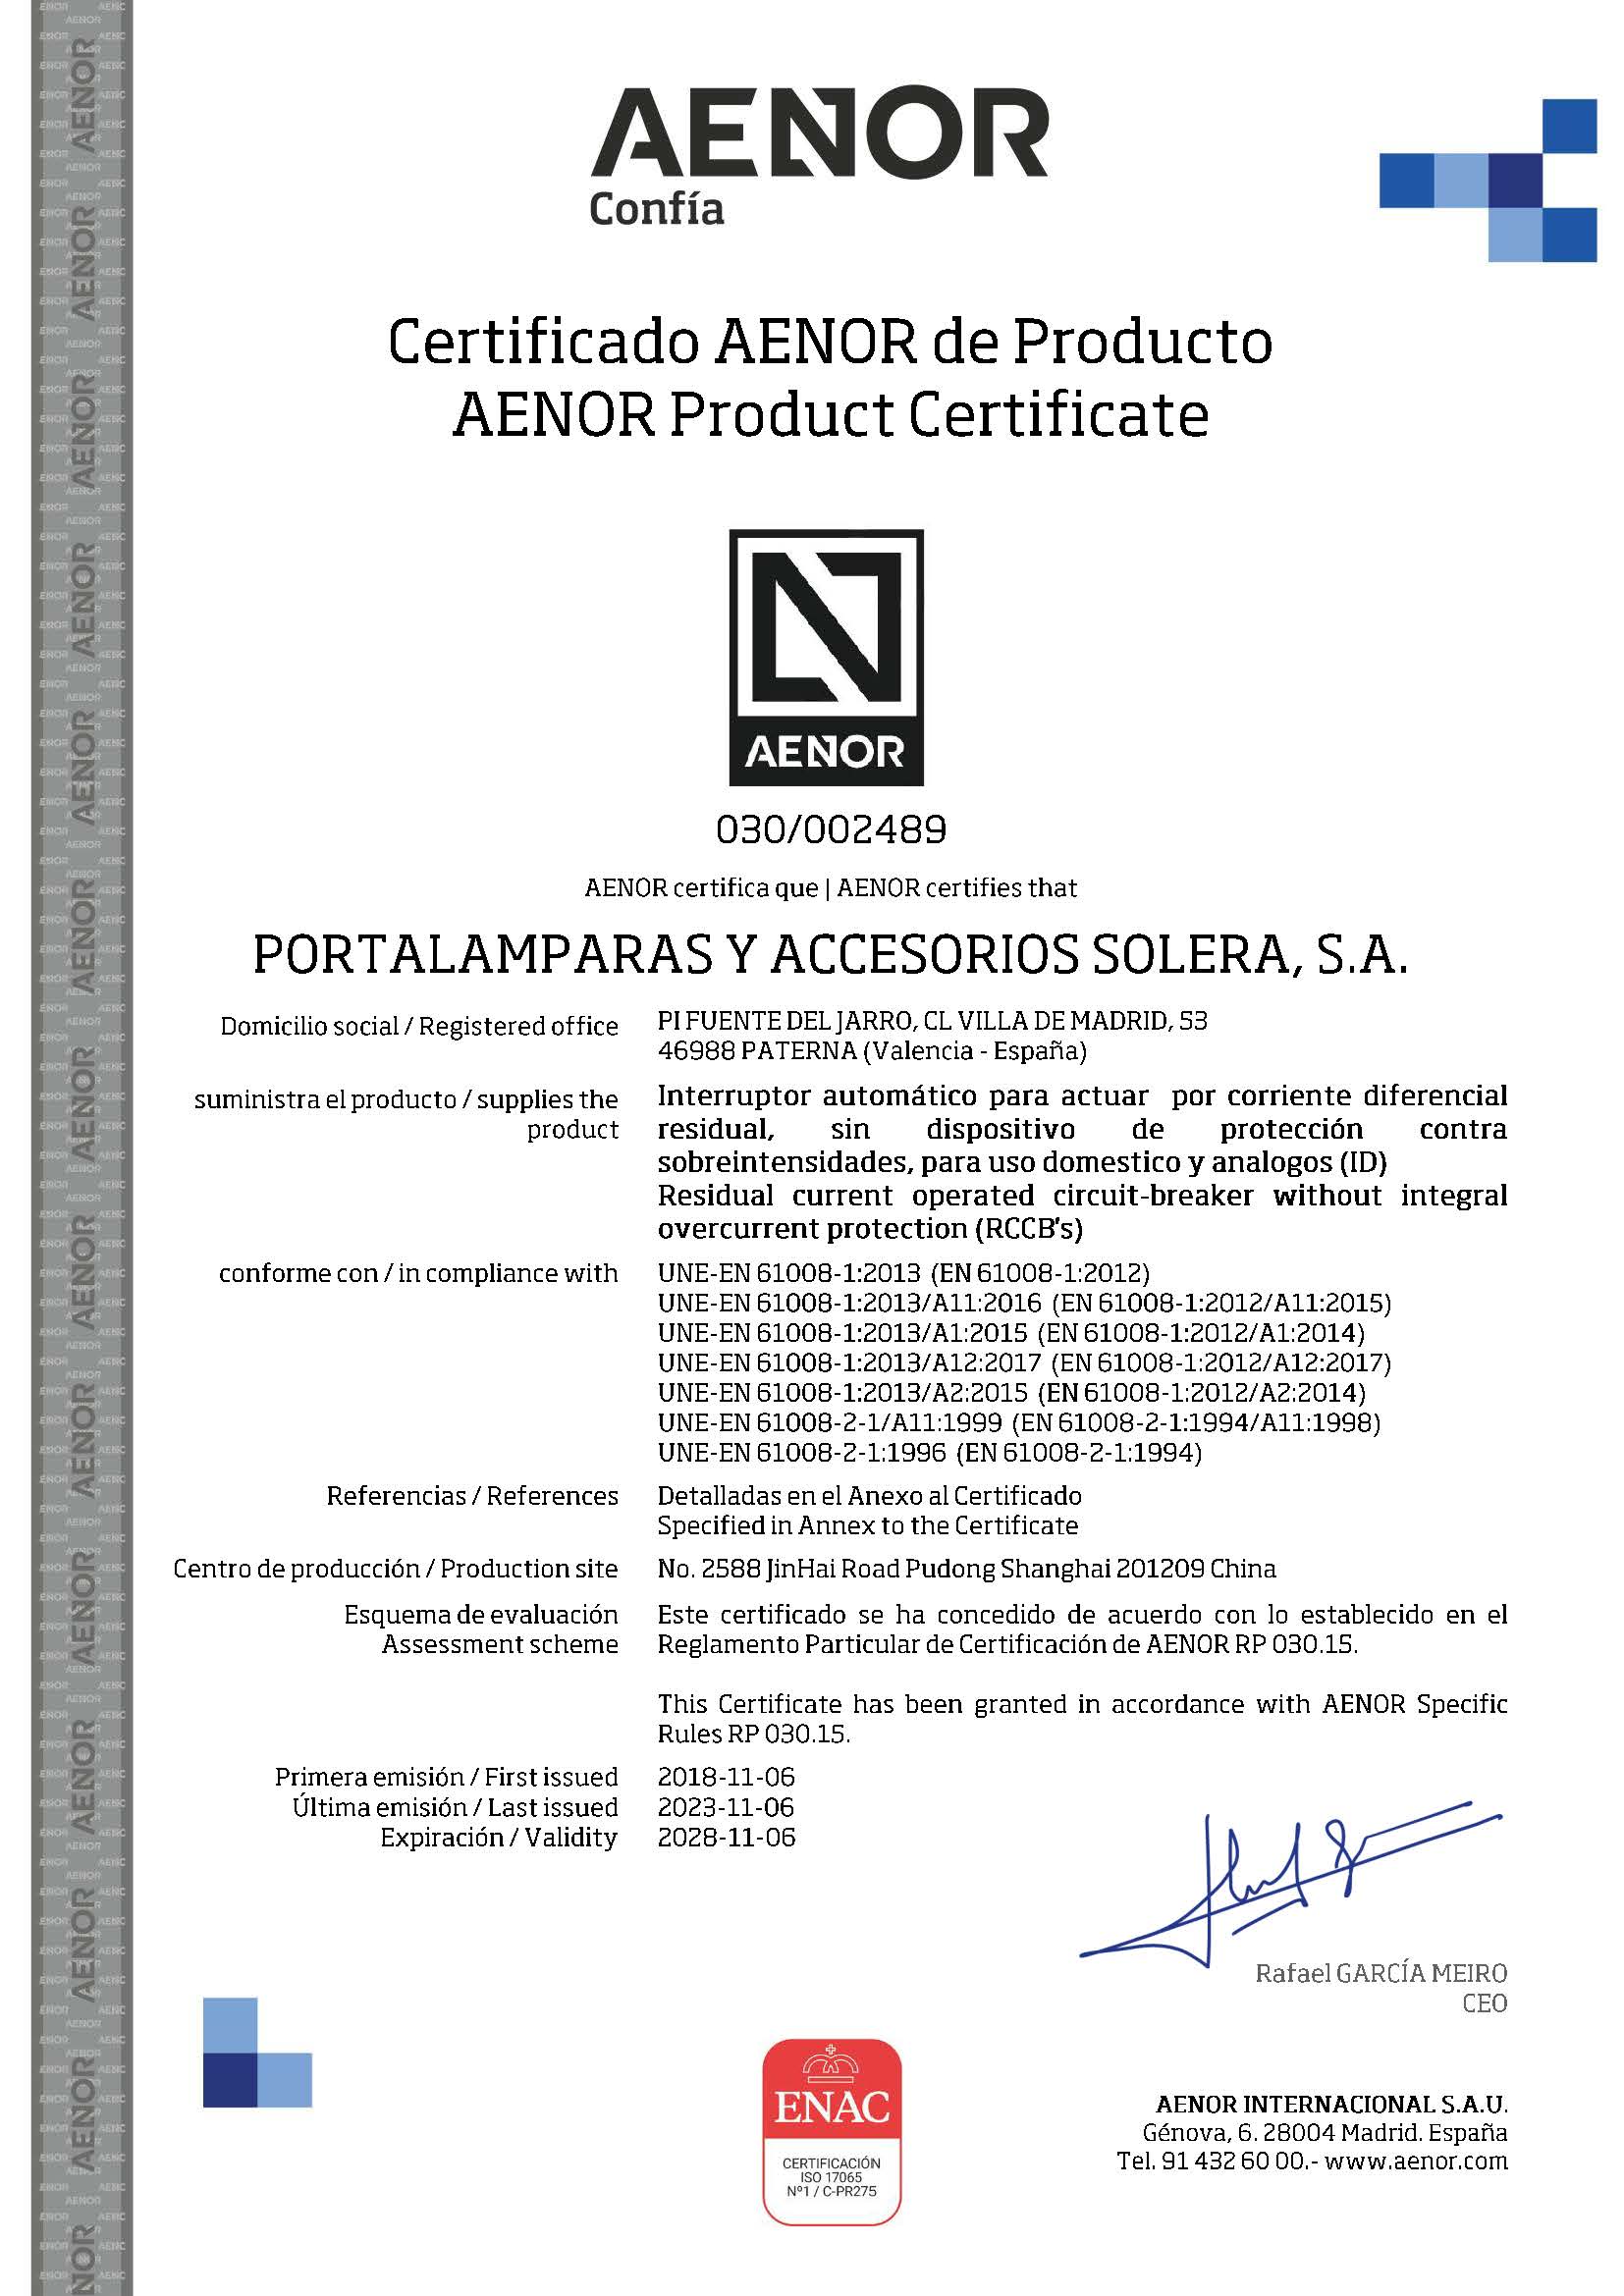 RCB AENOR product certificate 